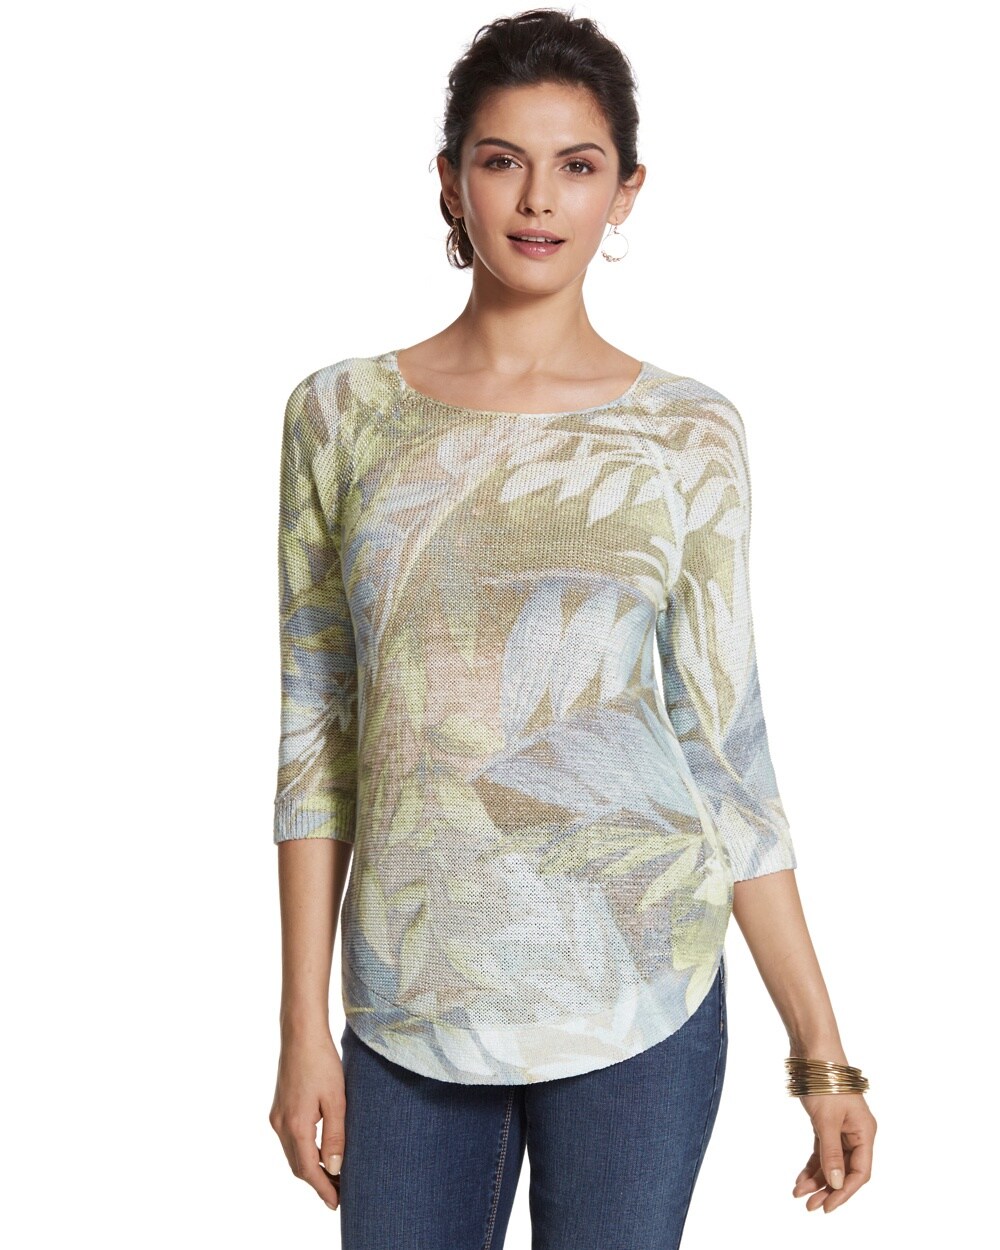 Tropic Texture Marianne Pullover Sweater